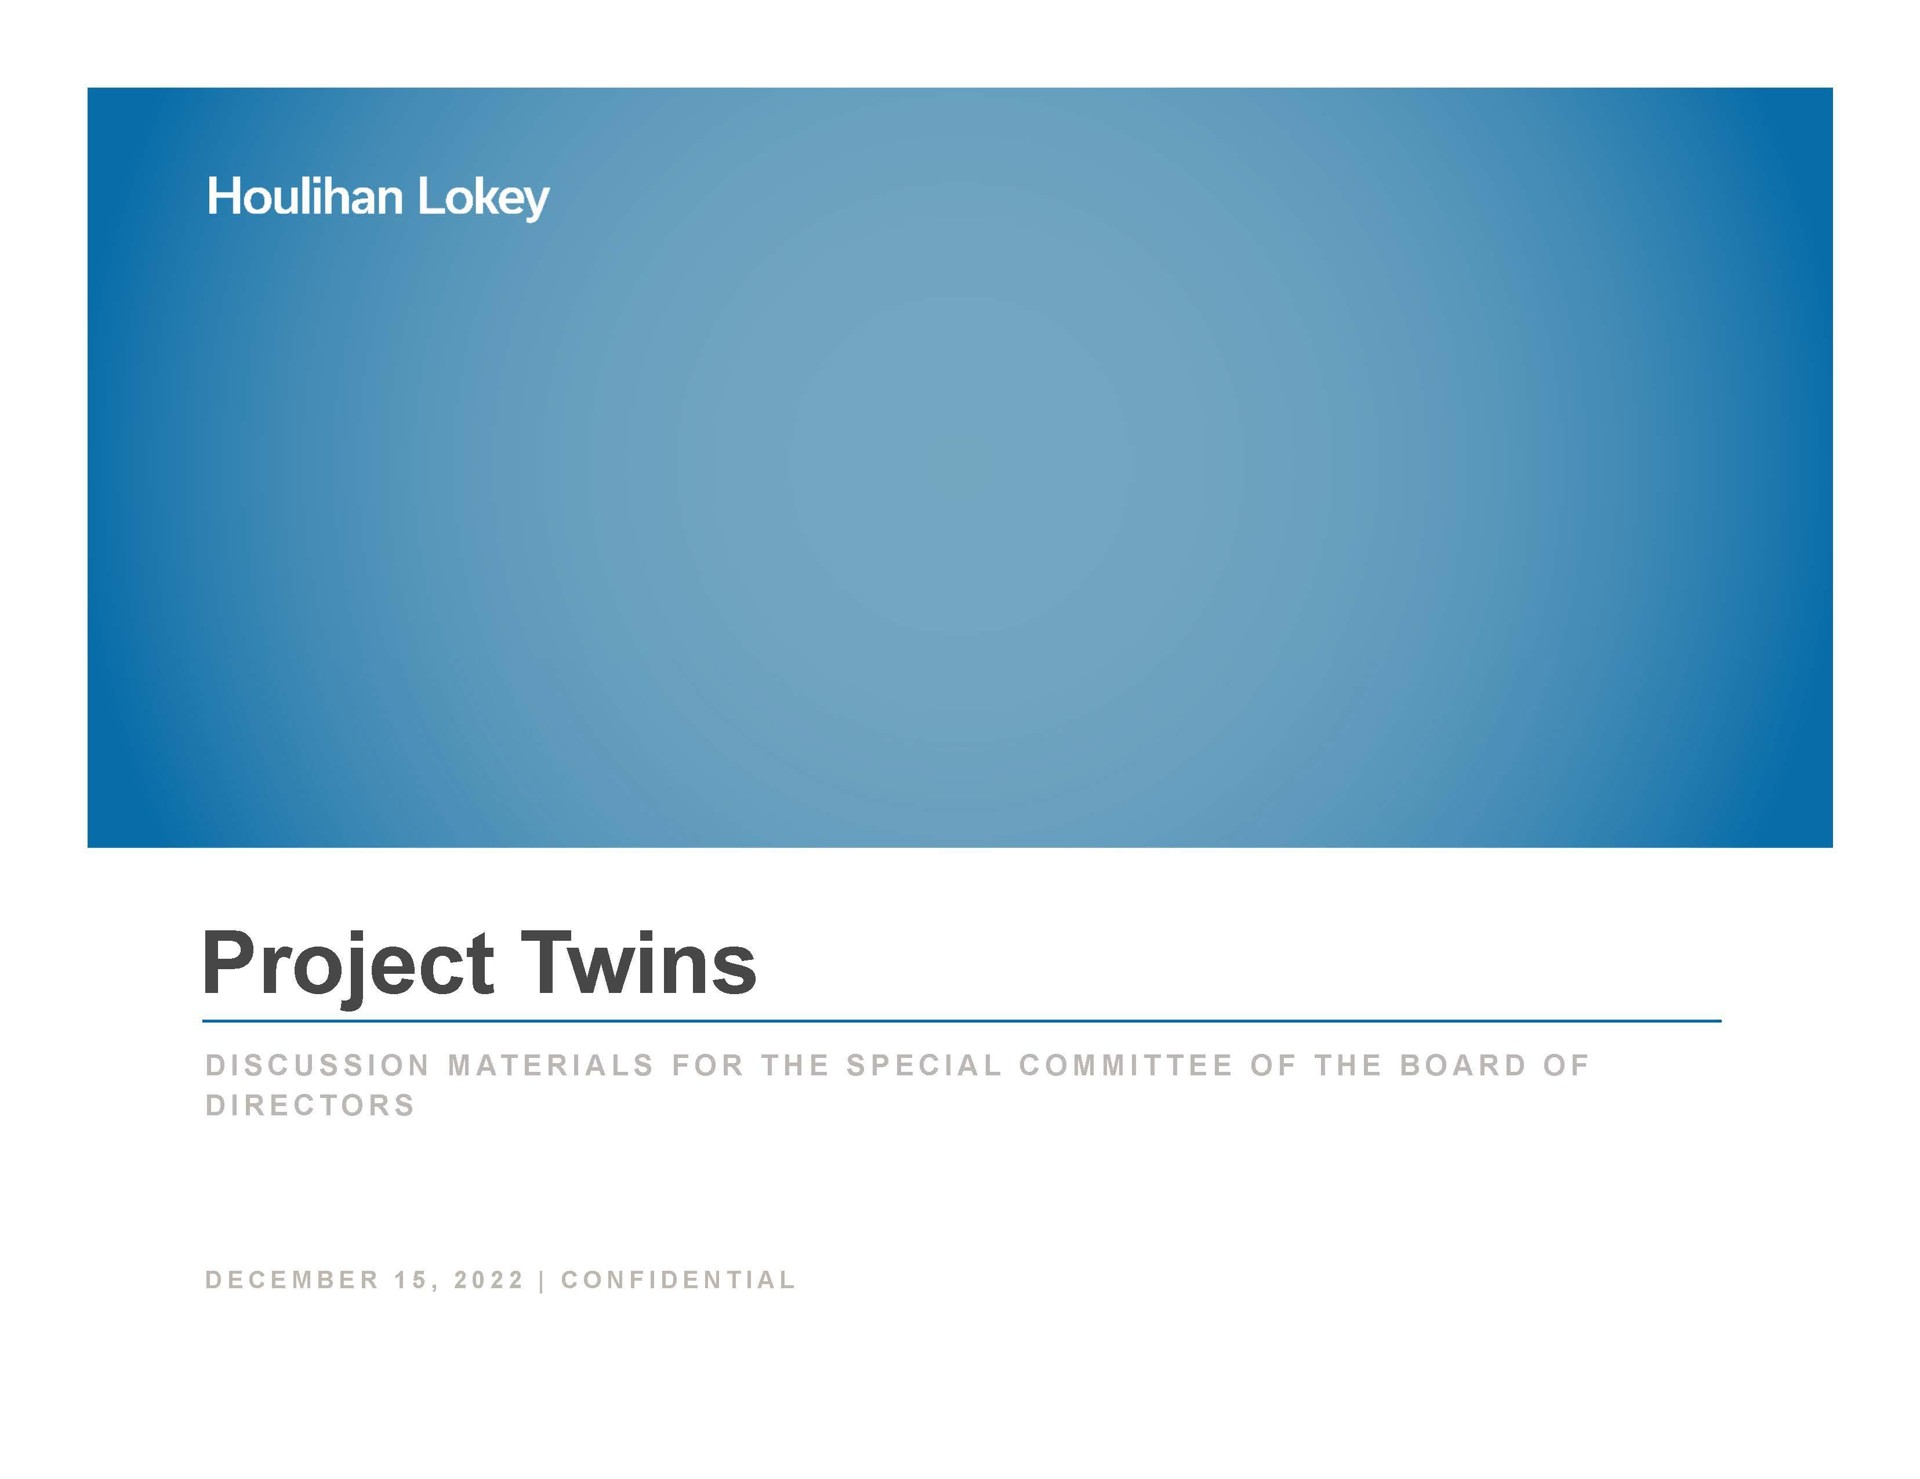 project twins discussion materials for the special committee of the board of directors | Houlihan Lokey